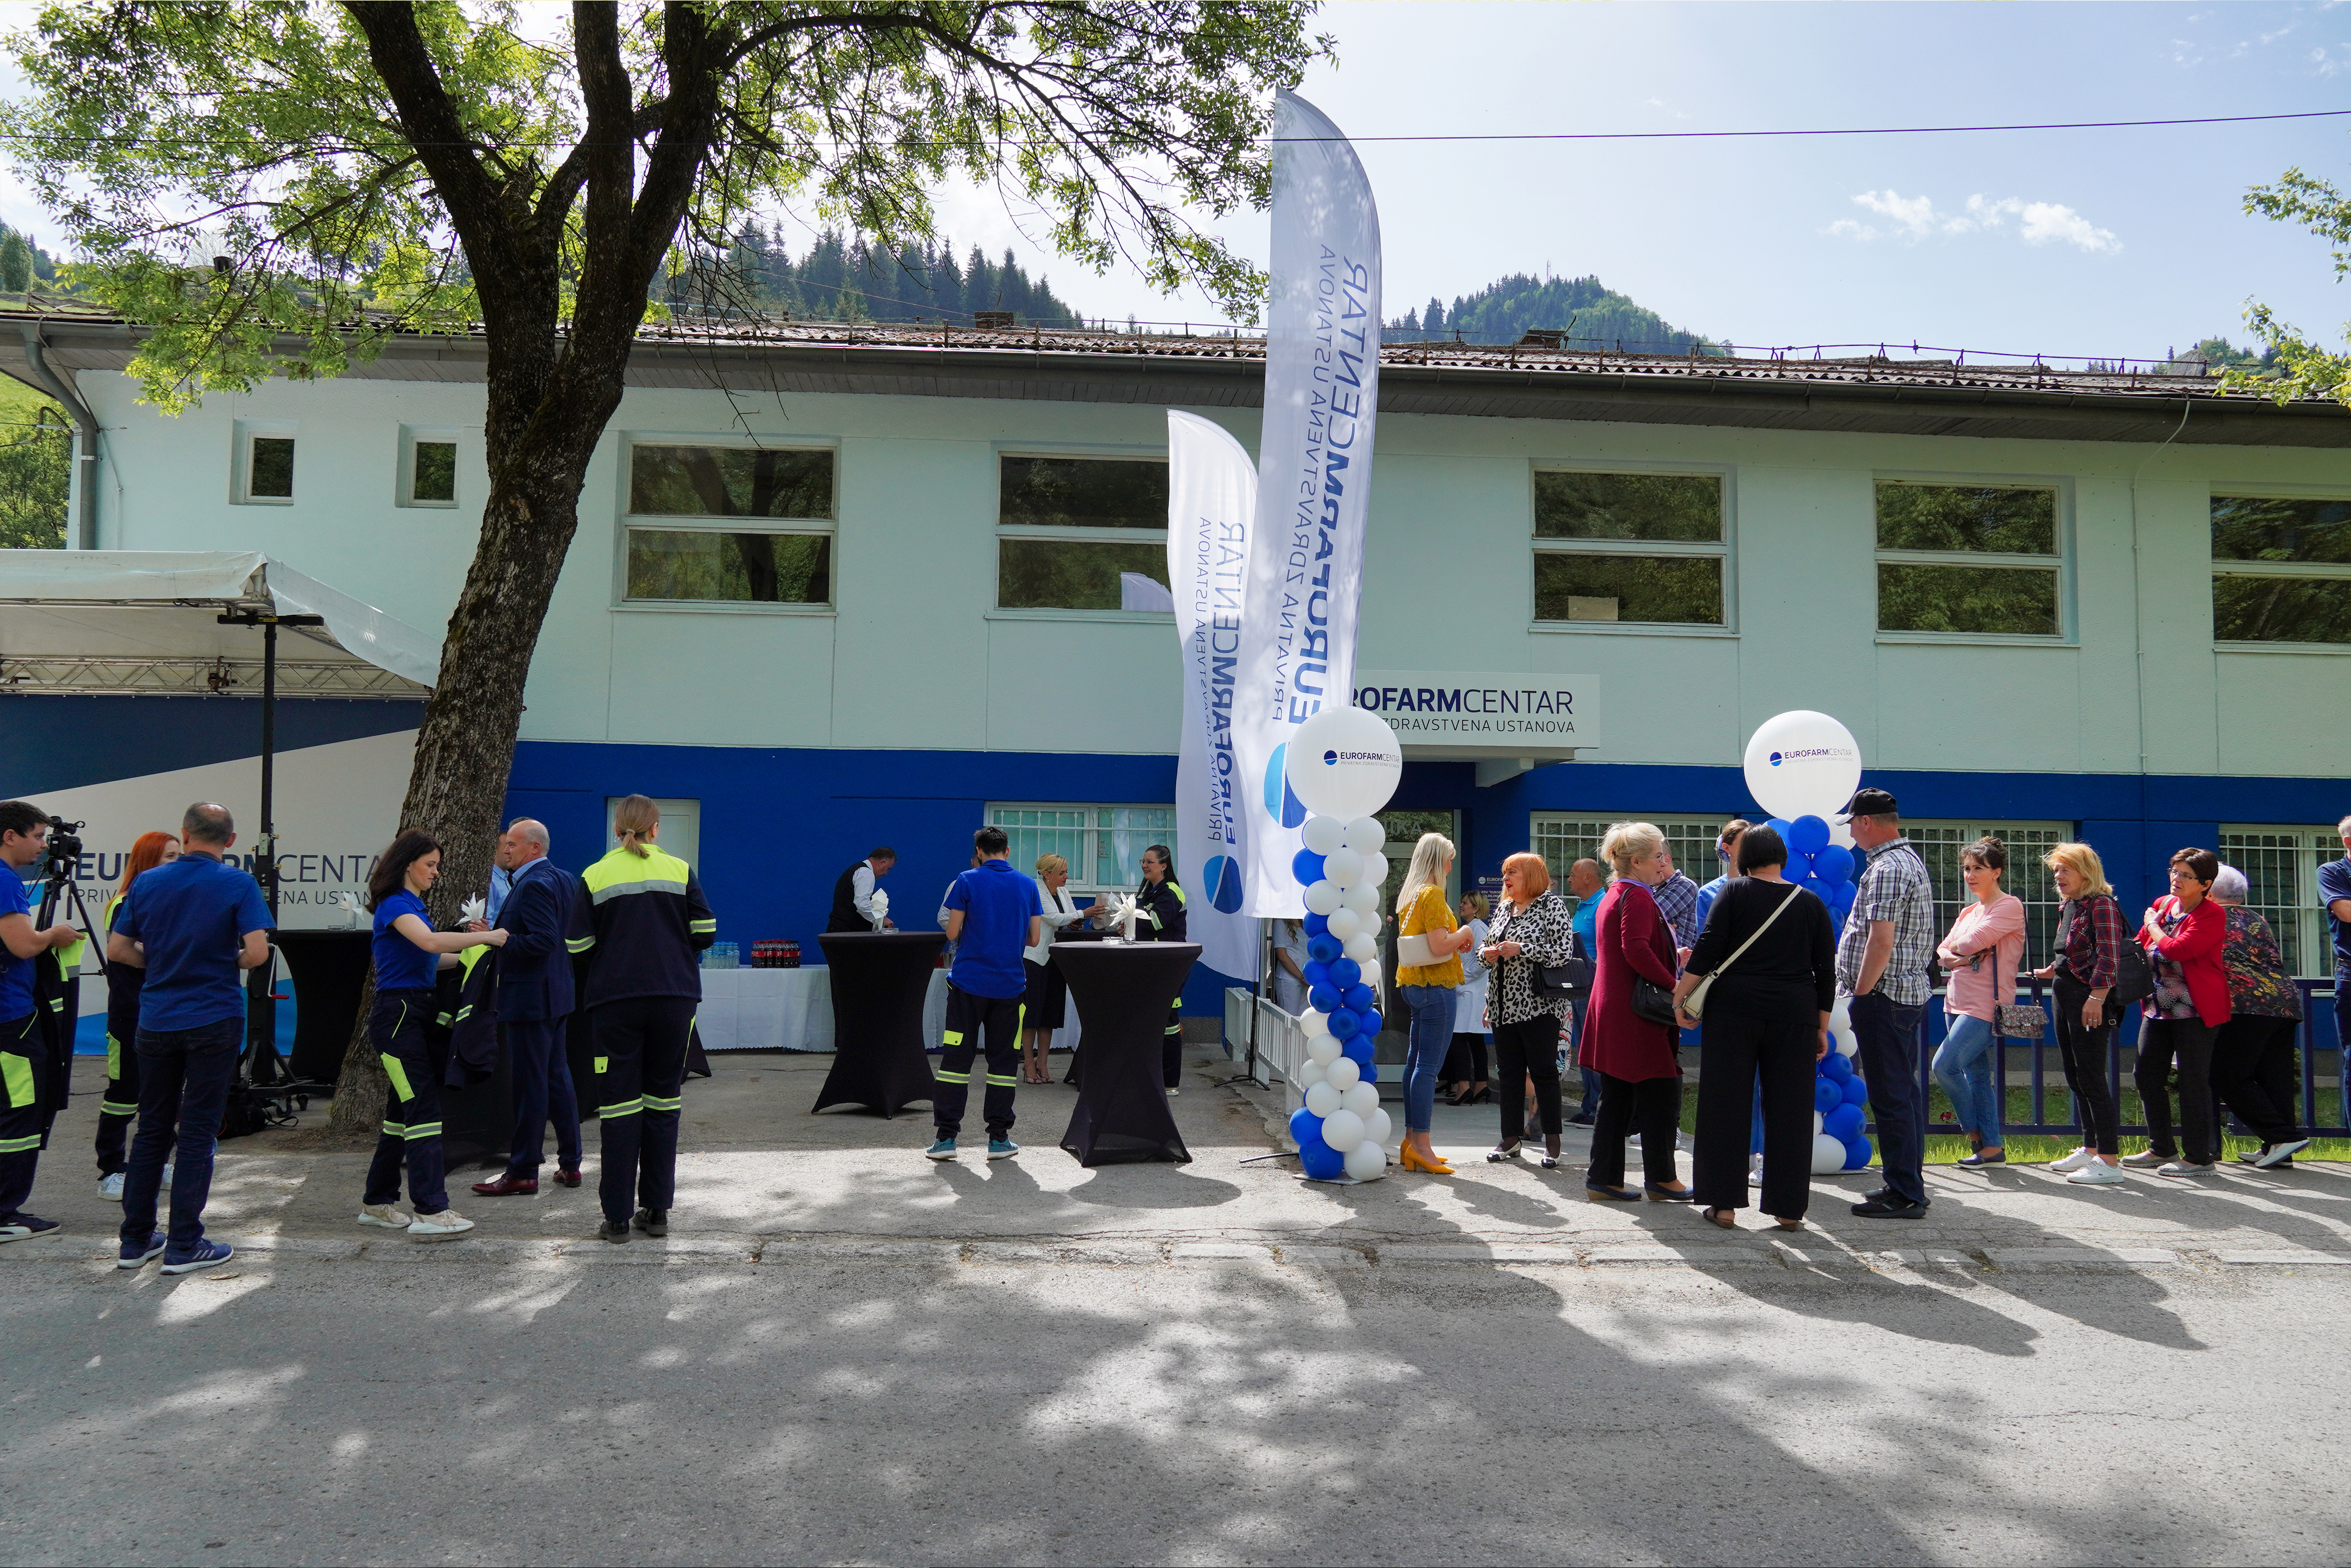 The Eurofarm polyclinic in Vareš was officially opened